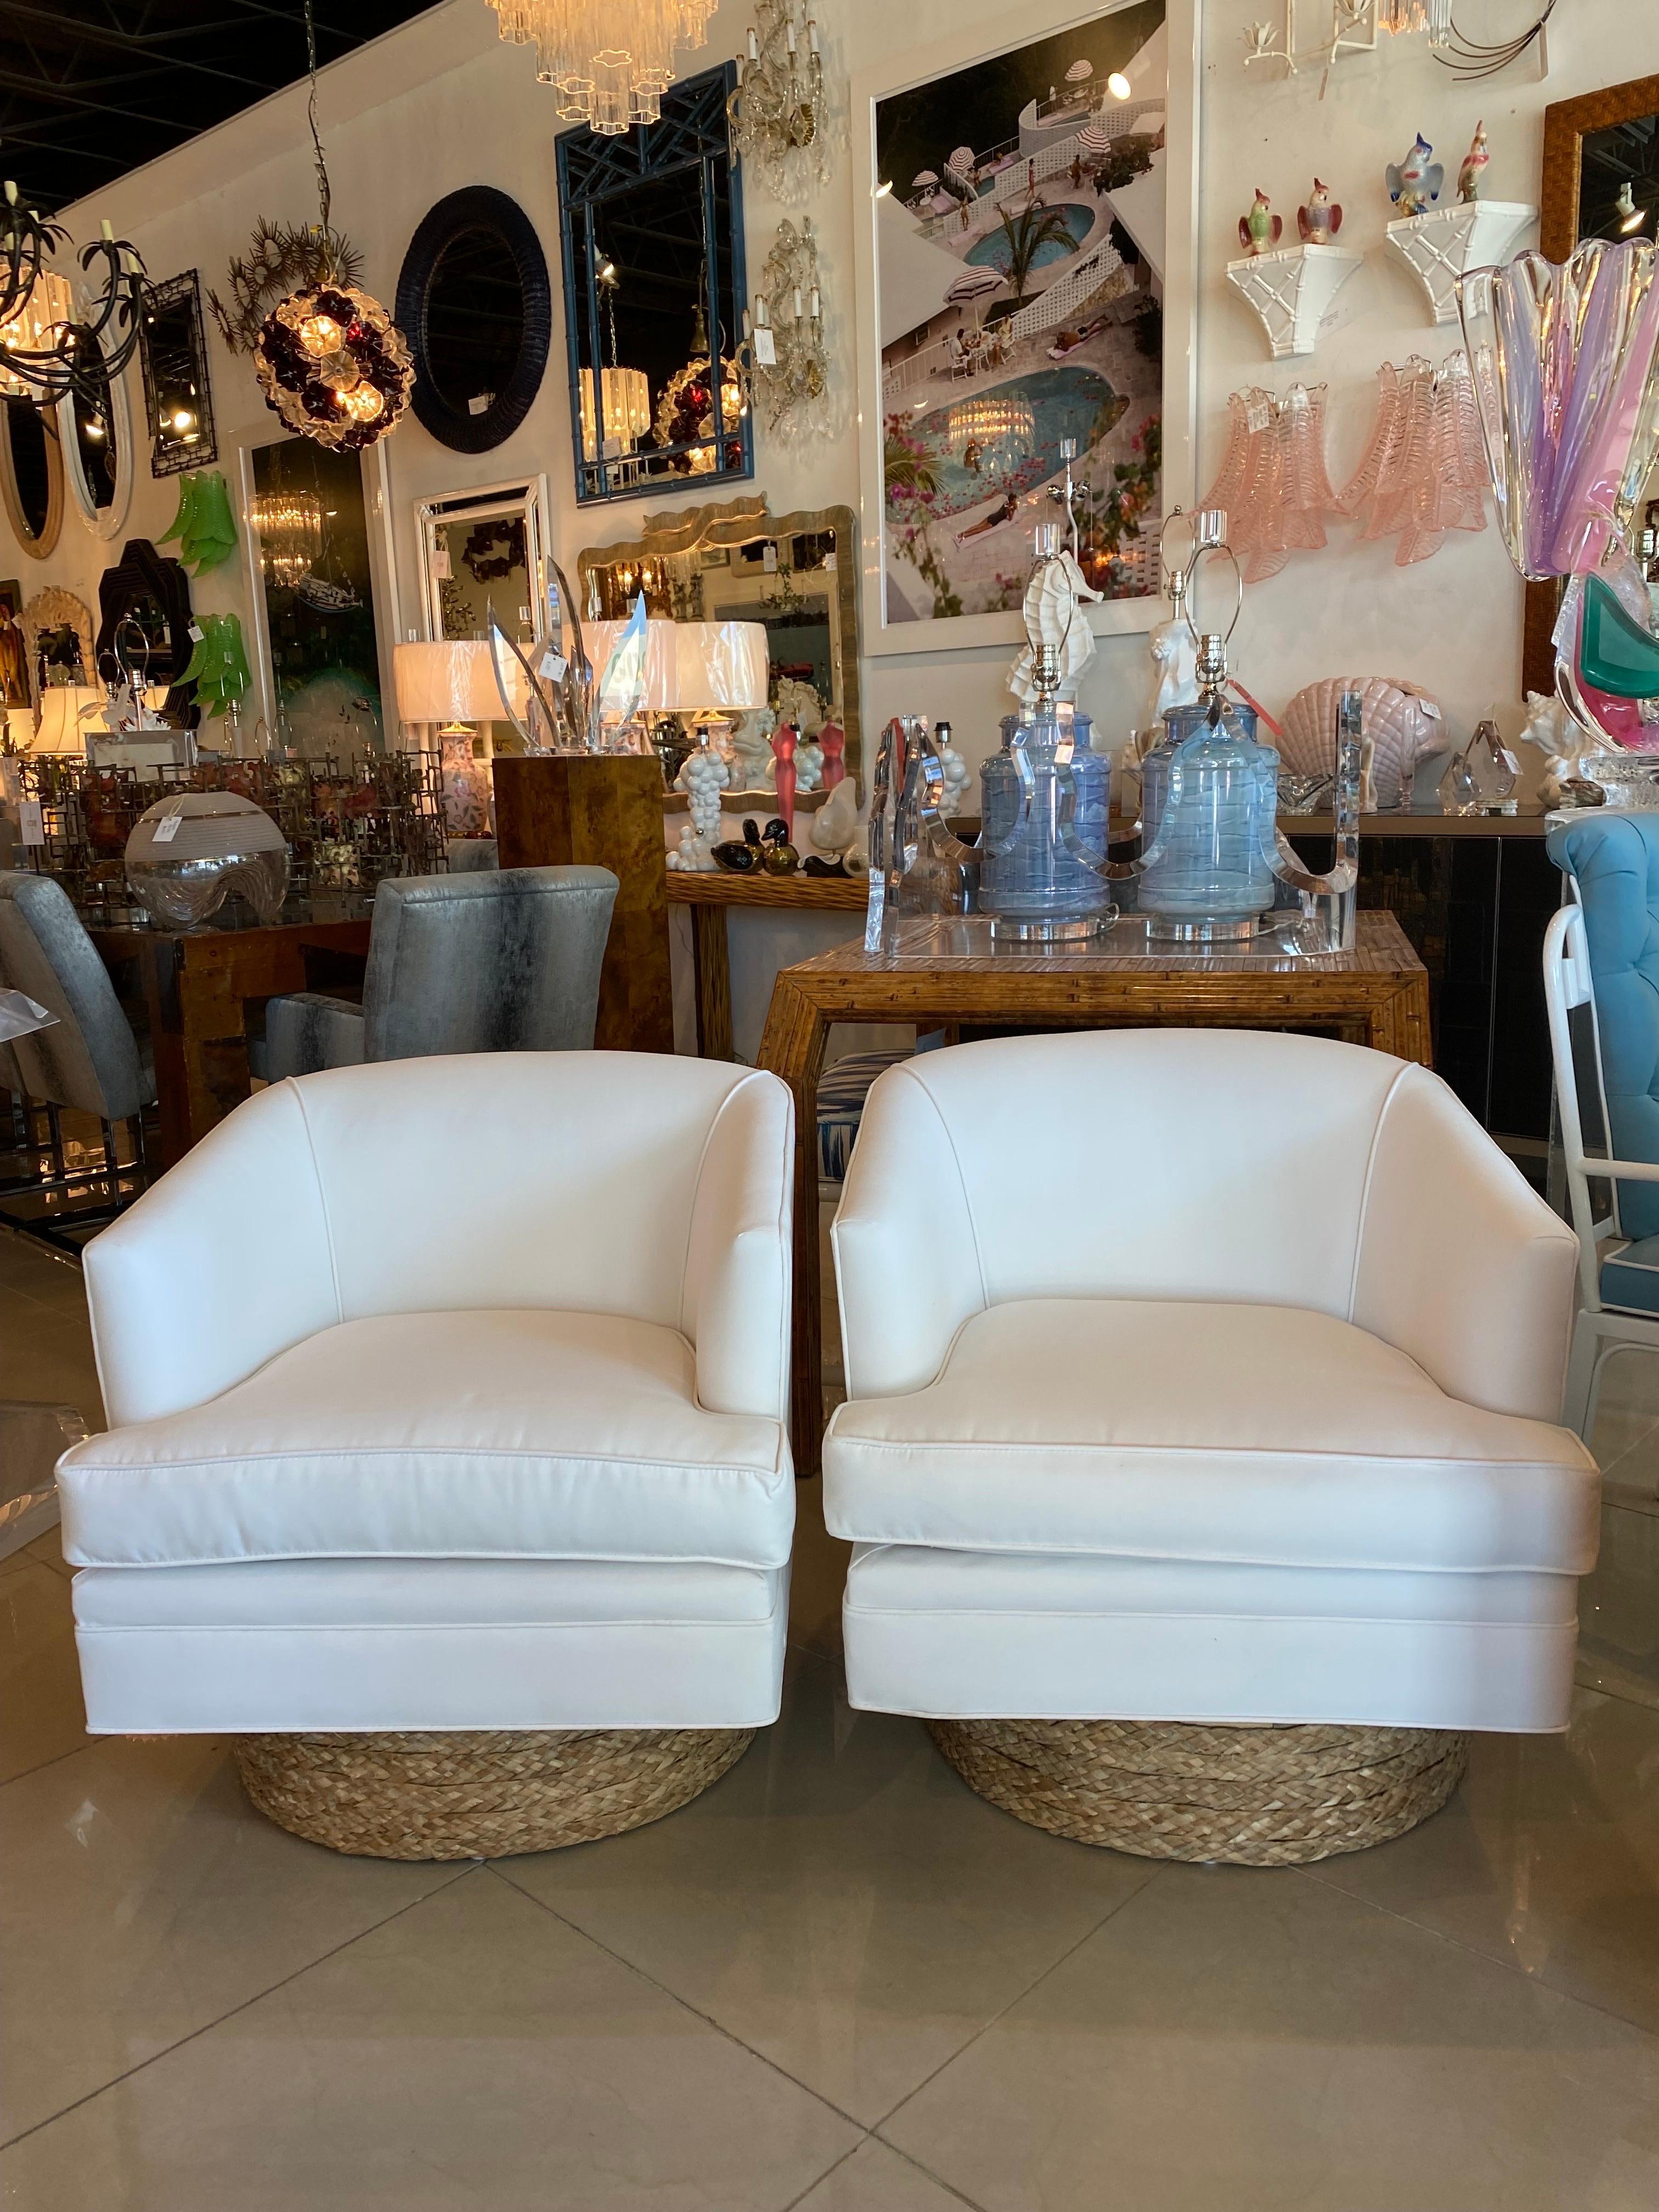 Lovely pair of vintage Milo Baughman style swivel chairs newly upholstered in a Sunbrella white fabric. Perfect for indoors or patio. New foam and insides. Seagrass base. Dimensions: 26.5 H x 30 overall depth x 27 W x 17 cushion depth x 18 seat